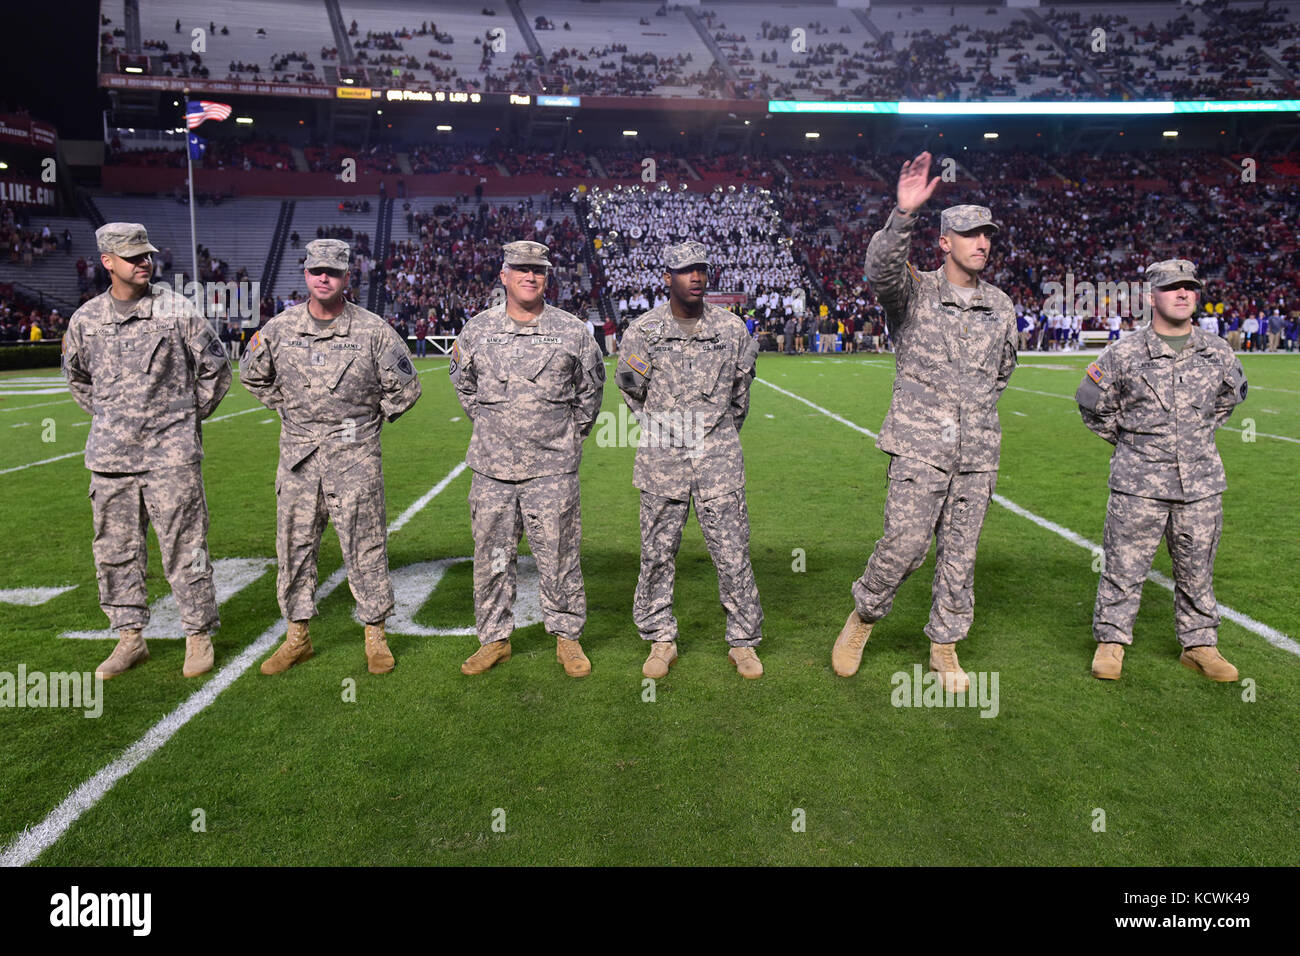 U.S. Army 2nd Lt. Joshua Blizzard, South Carolina National Guard, 1-151st Attack Reconnaissance Battalion UH-64 Apache pilot, receives  recognition at Williams-Brice stadium in Columbia, South Carolina, Nov. 19, 2016. The South Carolina Army National Guard conducted a fly-over in support of Fort Jackson's participation in the University of South Carolina's military appreciation game. (U.S. Air National Guard photo by Airman 1st Class Megan Floyd) Stock Photo